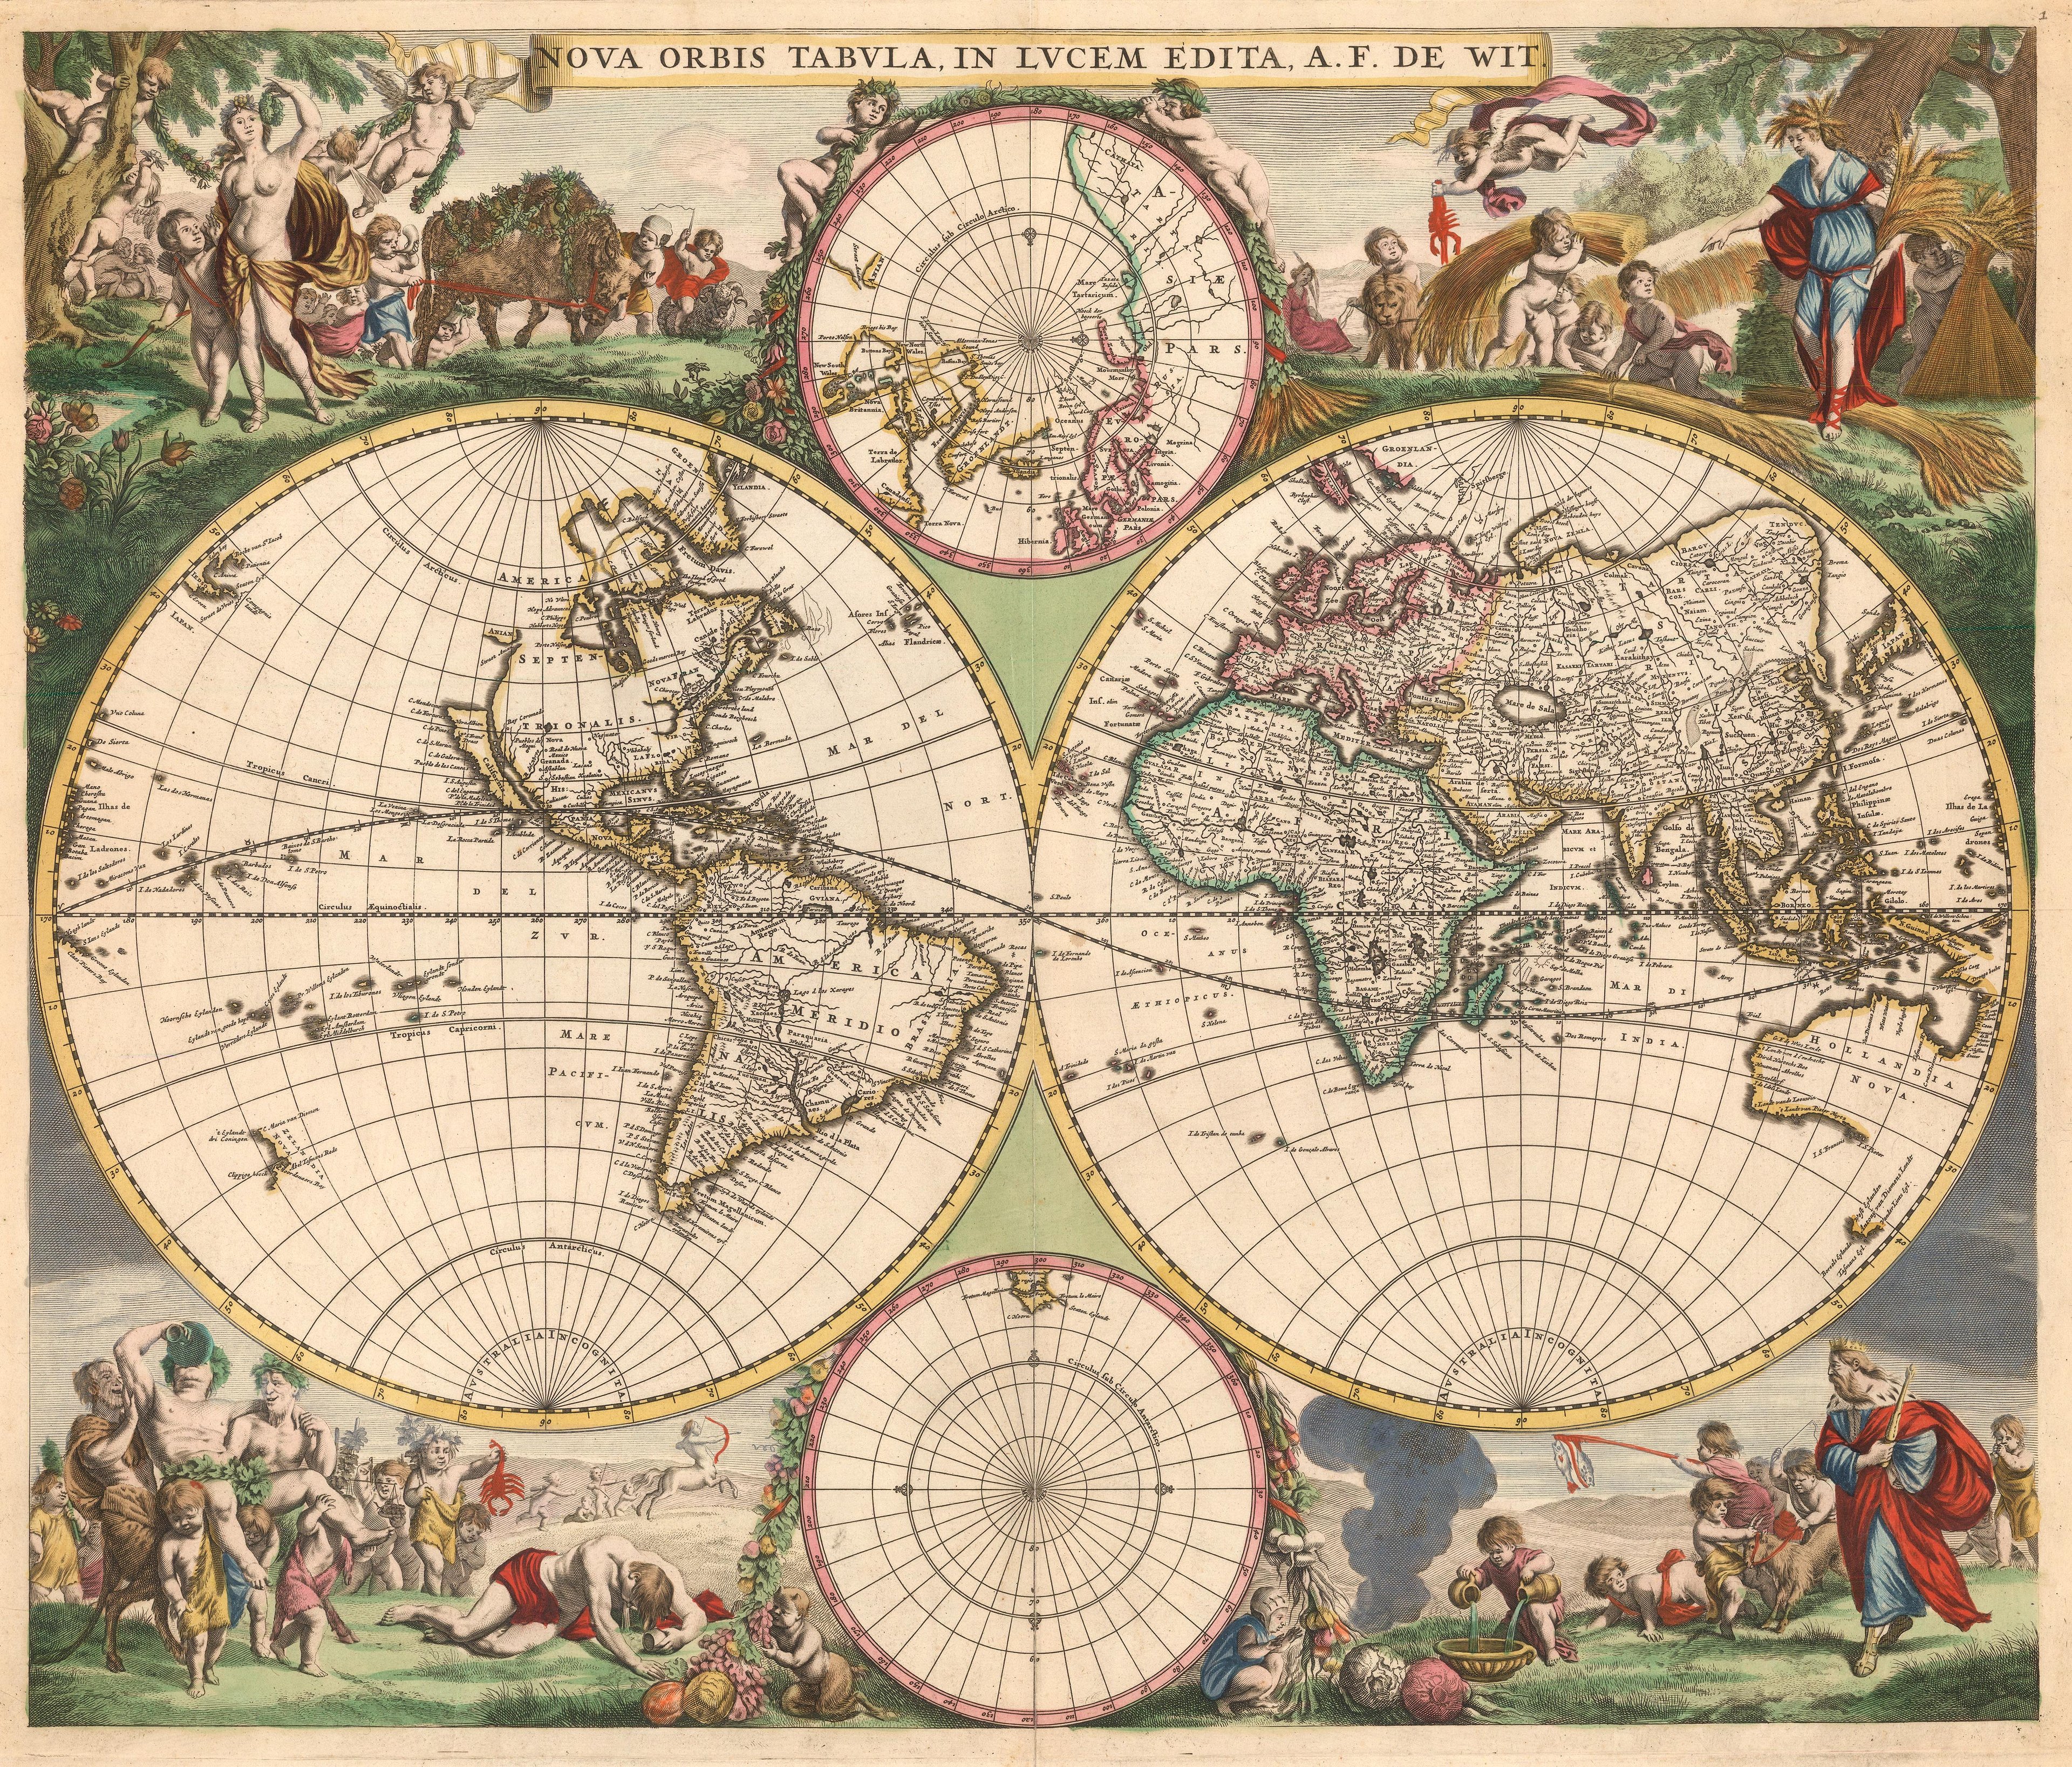 Frederick de Wit's Double Hemisphere World Map, Nova Orbis Tabula, with stunning illustrations around the outside of the maps.